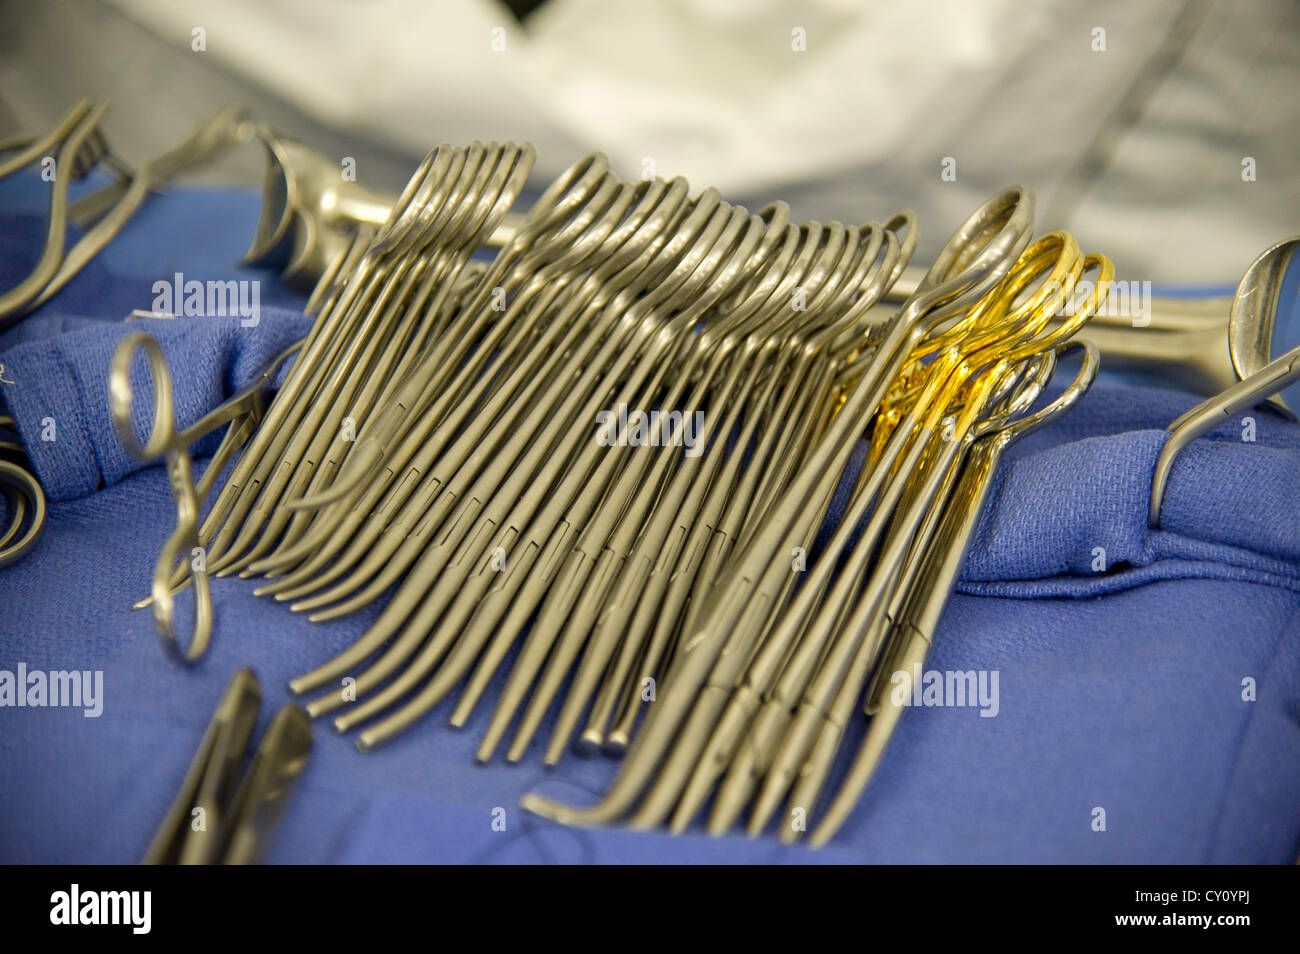 Medical equipment is seen on a table in an operating room during a field exercise at the Joint Readiness Training Center (JRTC), Fort Polk, La., Oct. 15, 2012. JRTC 13-01 is designed to prepare and educate U.S. military Service members for deployments to the Middle East. Stock Photo